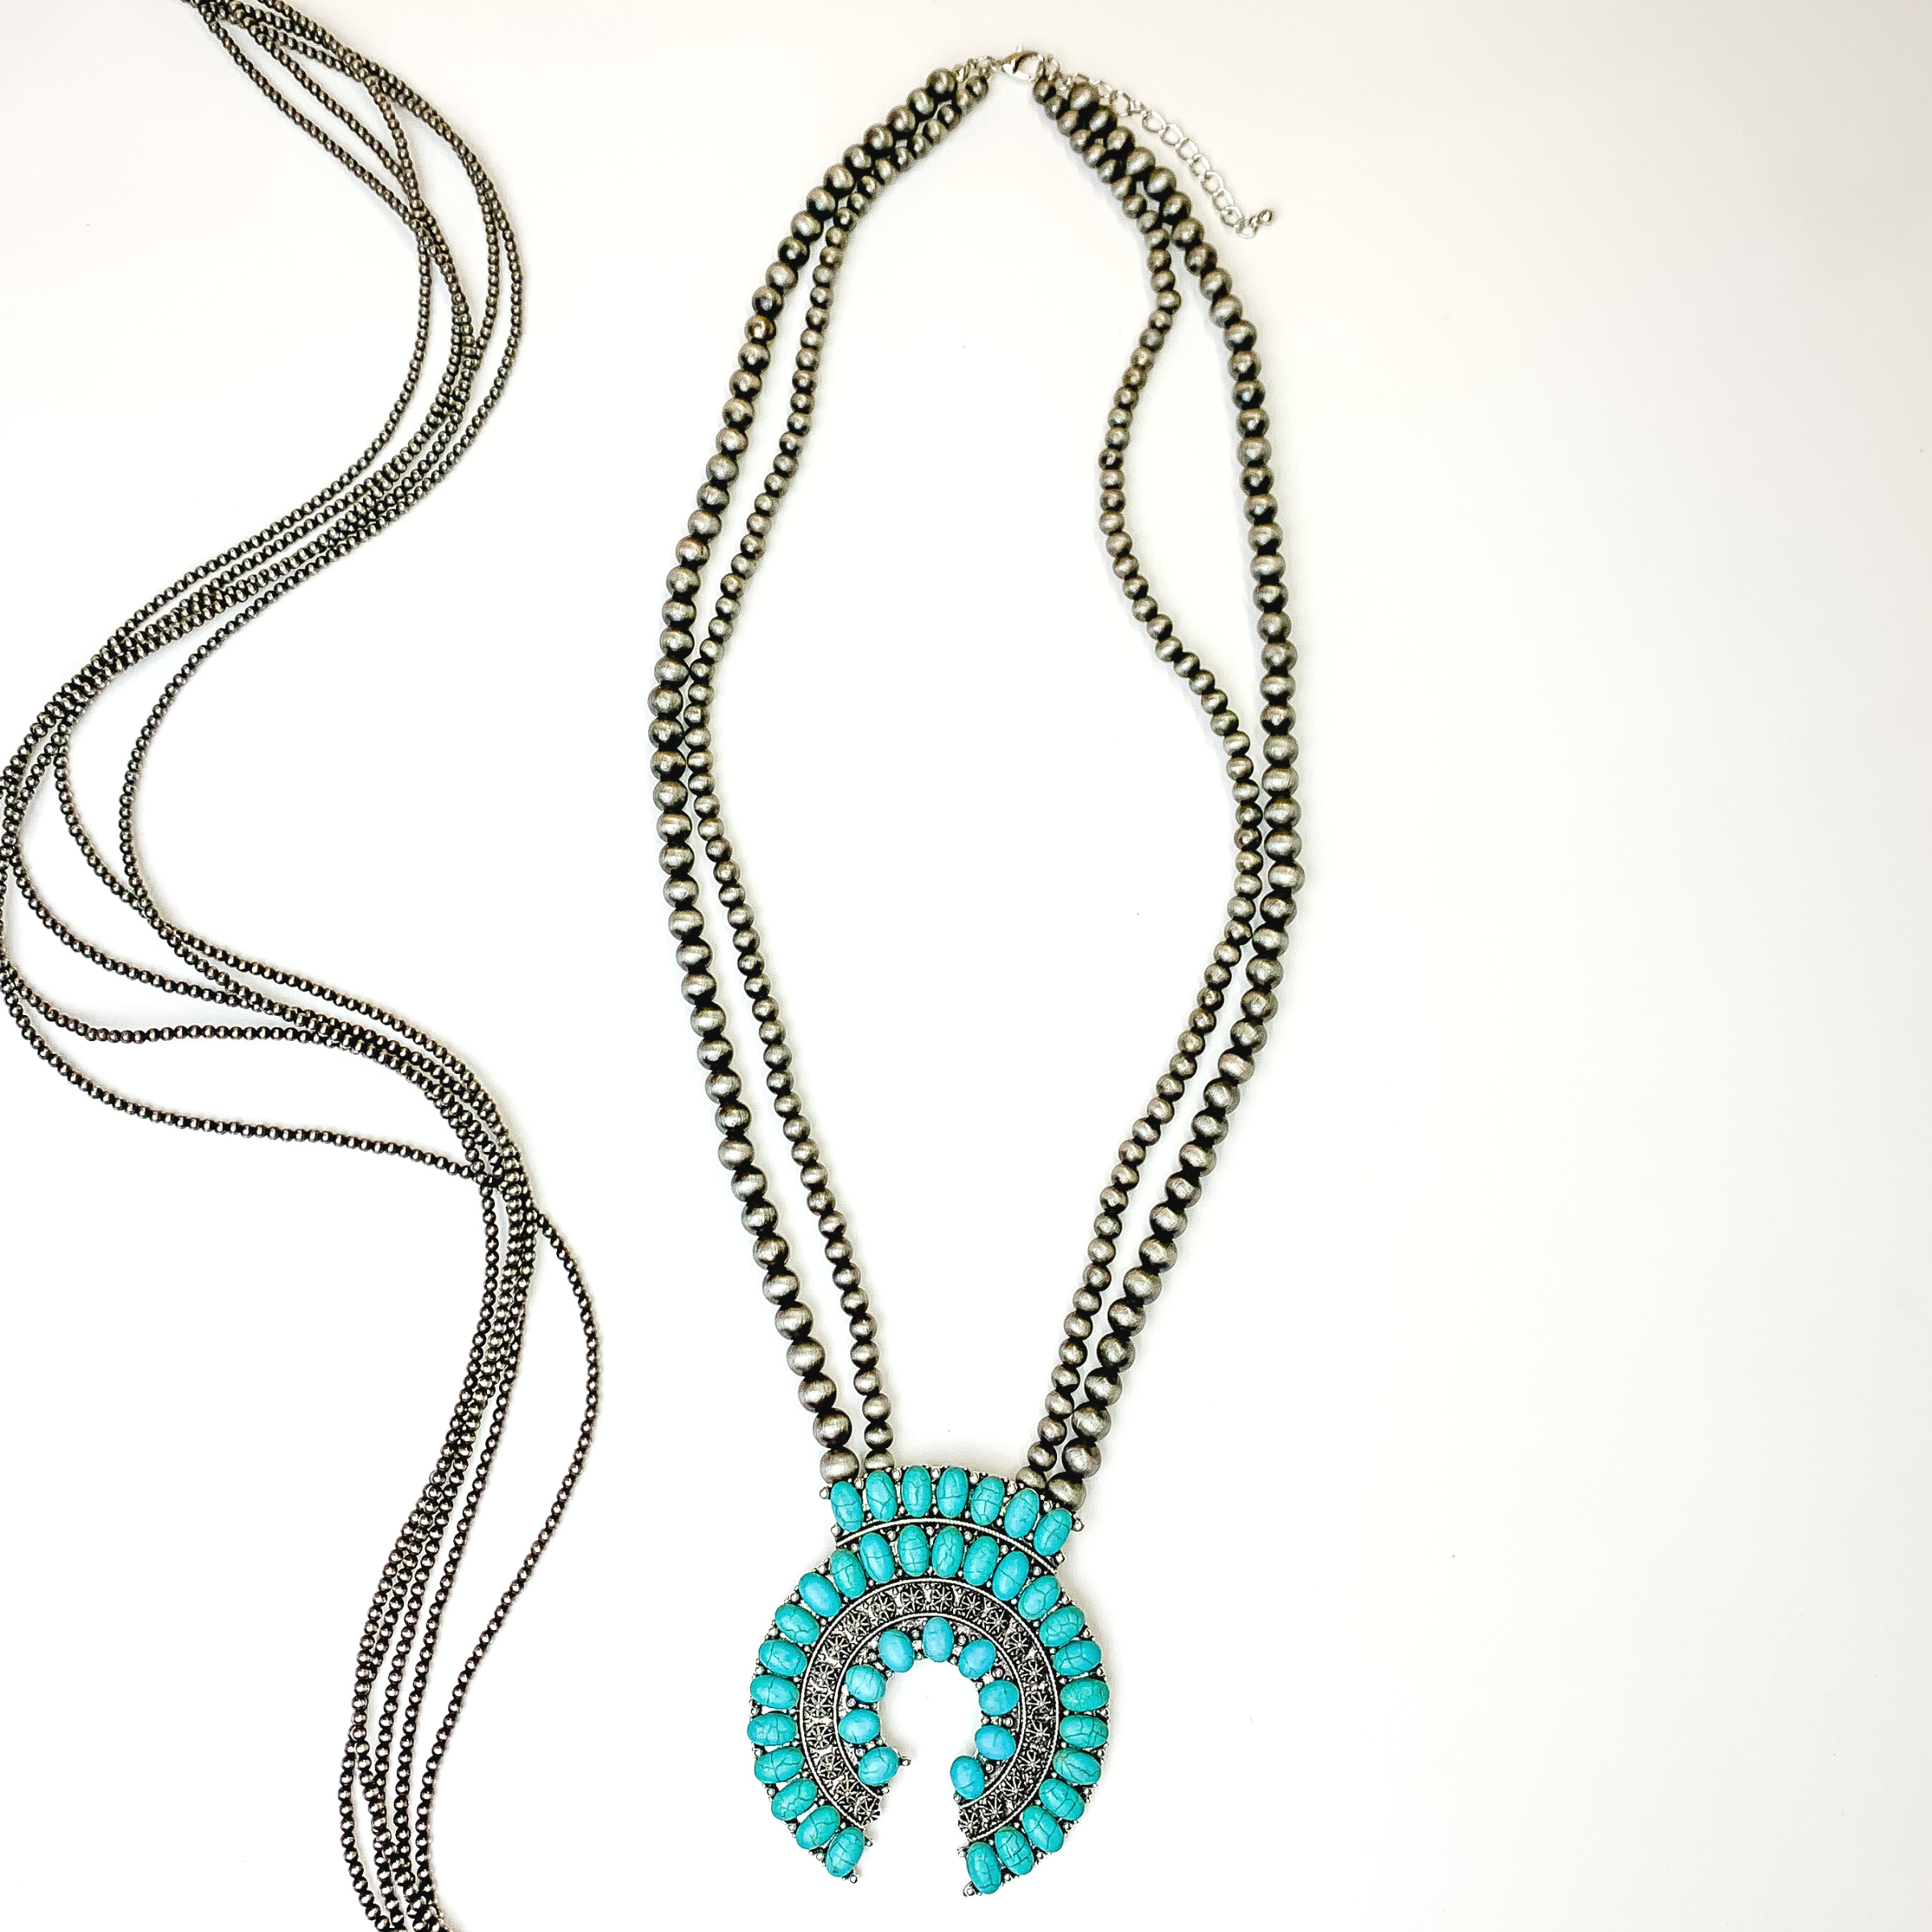 Oval Pendant Necklace with Turquoise Beading - Giddy Up Glamour Boutique